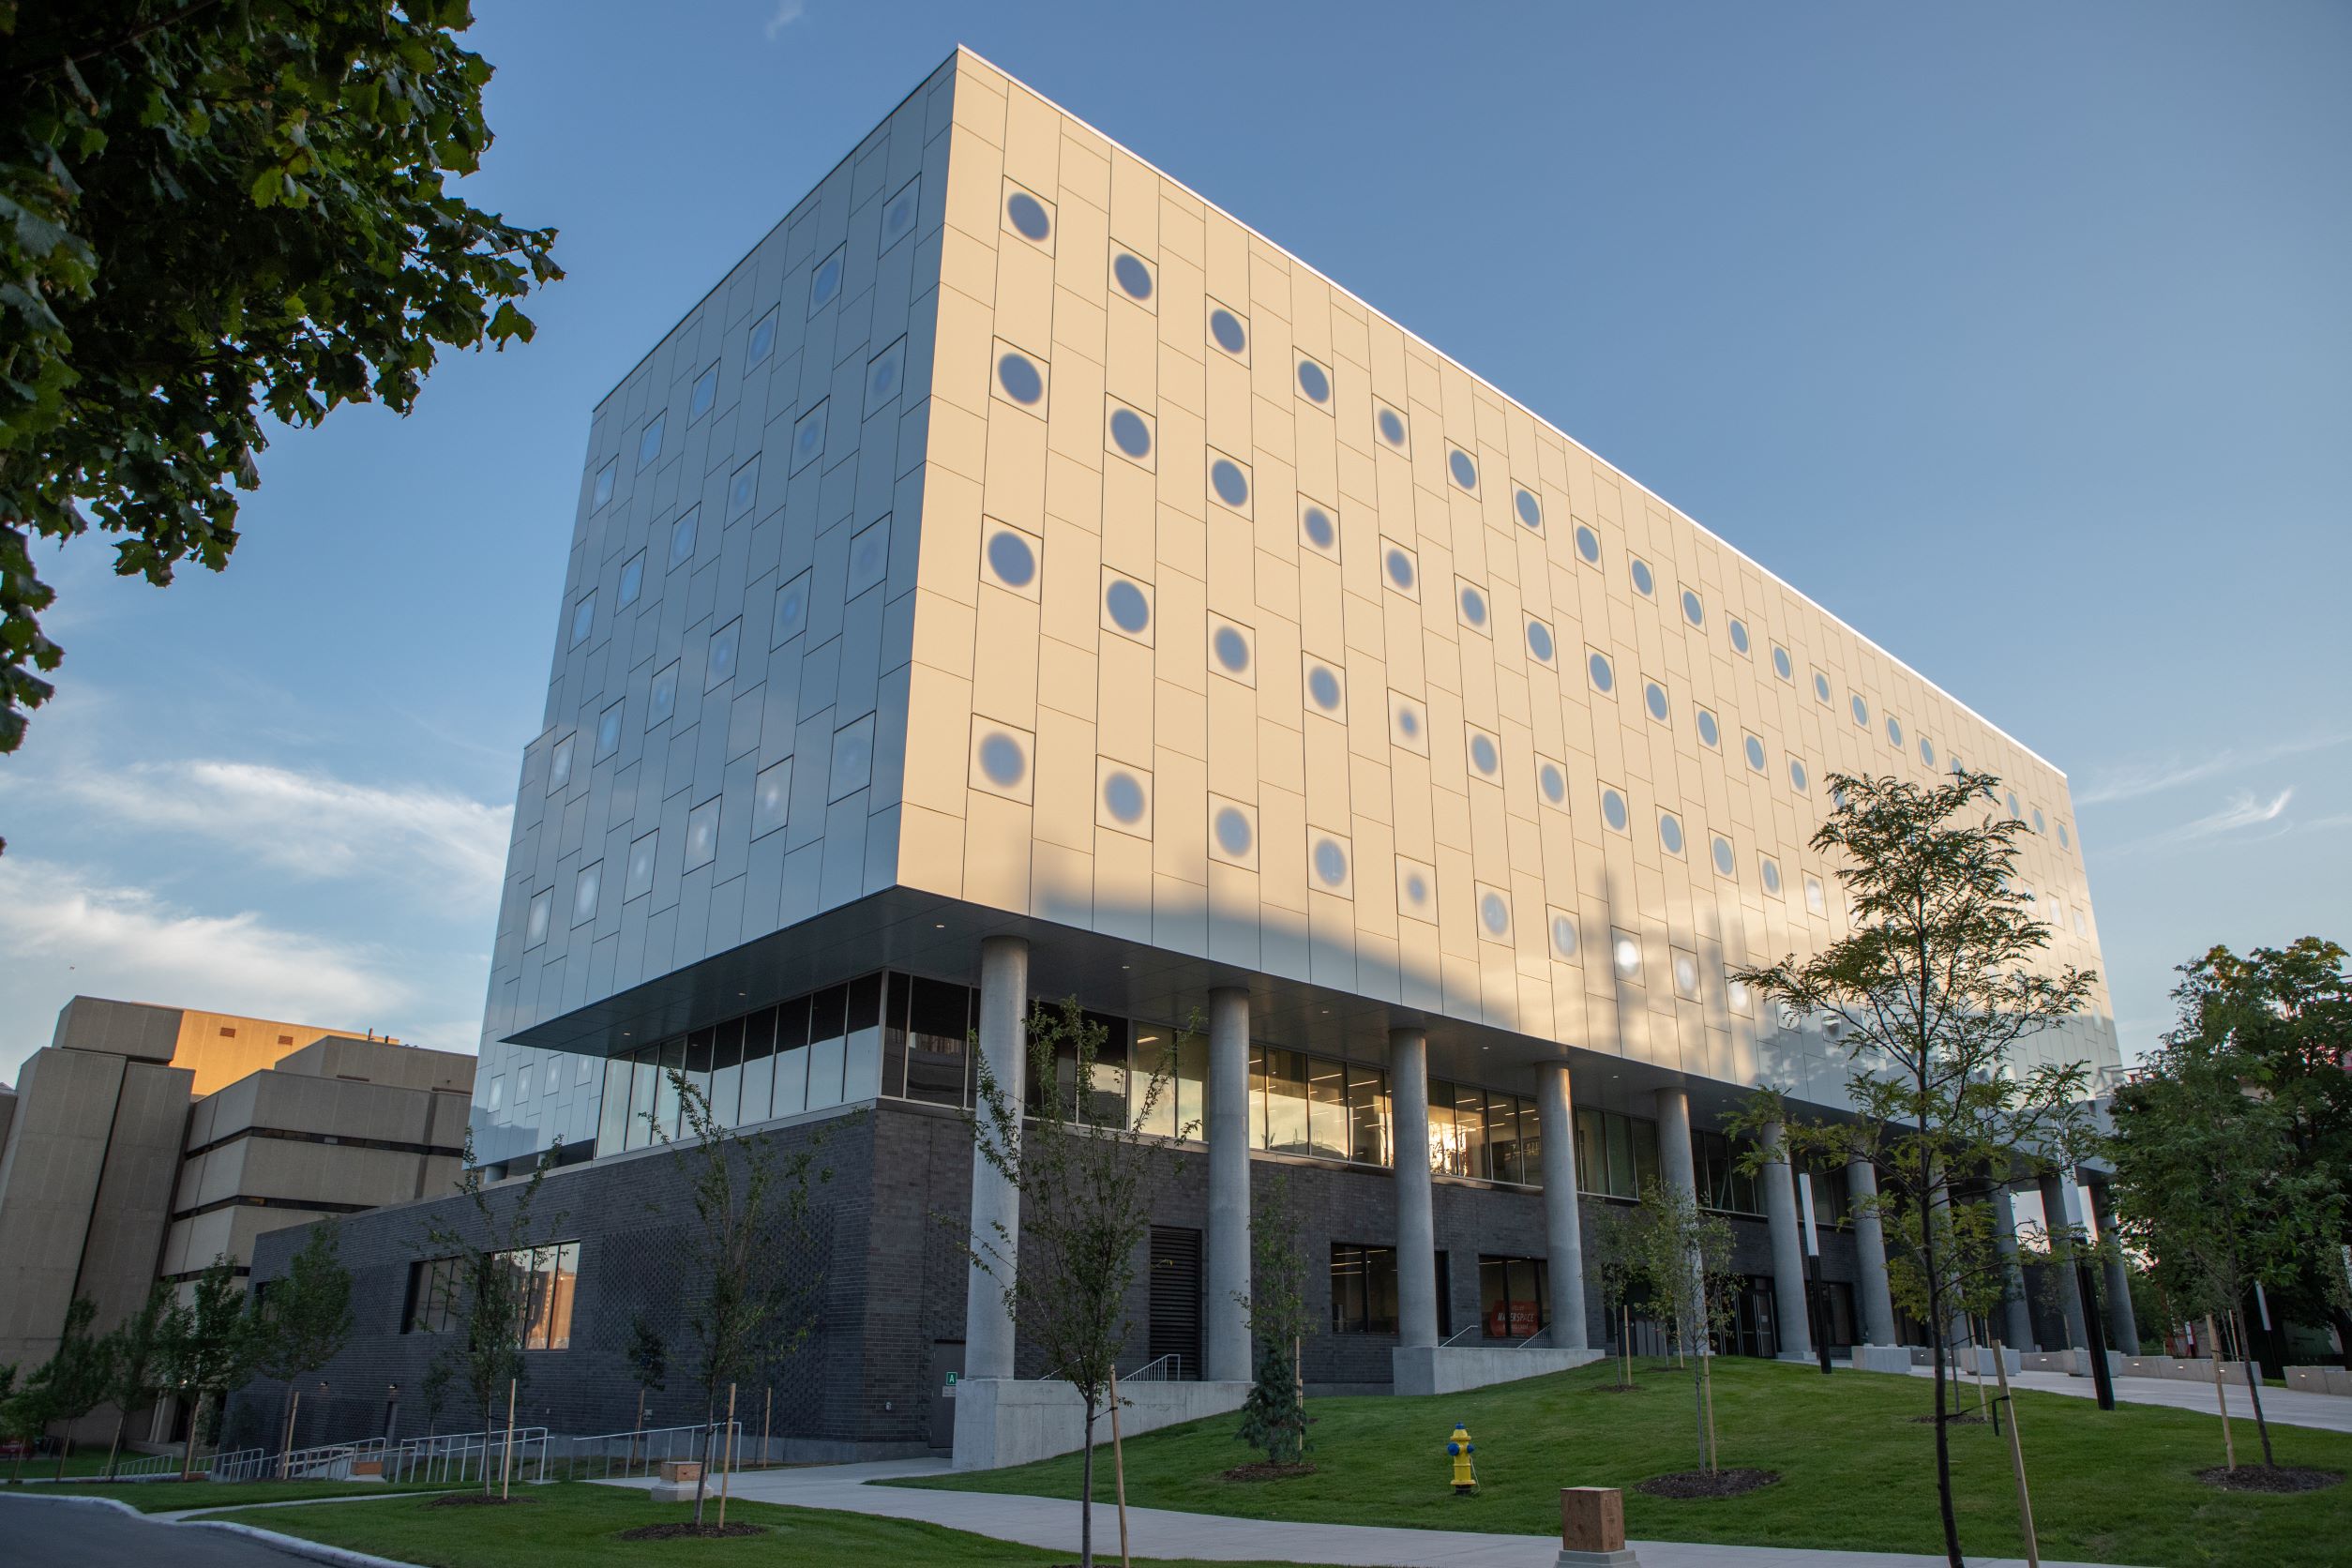 The STEM Complex on the uOttawa campus